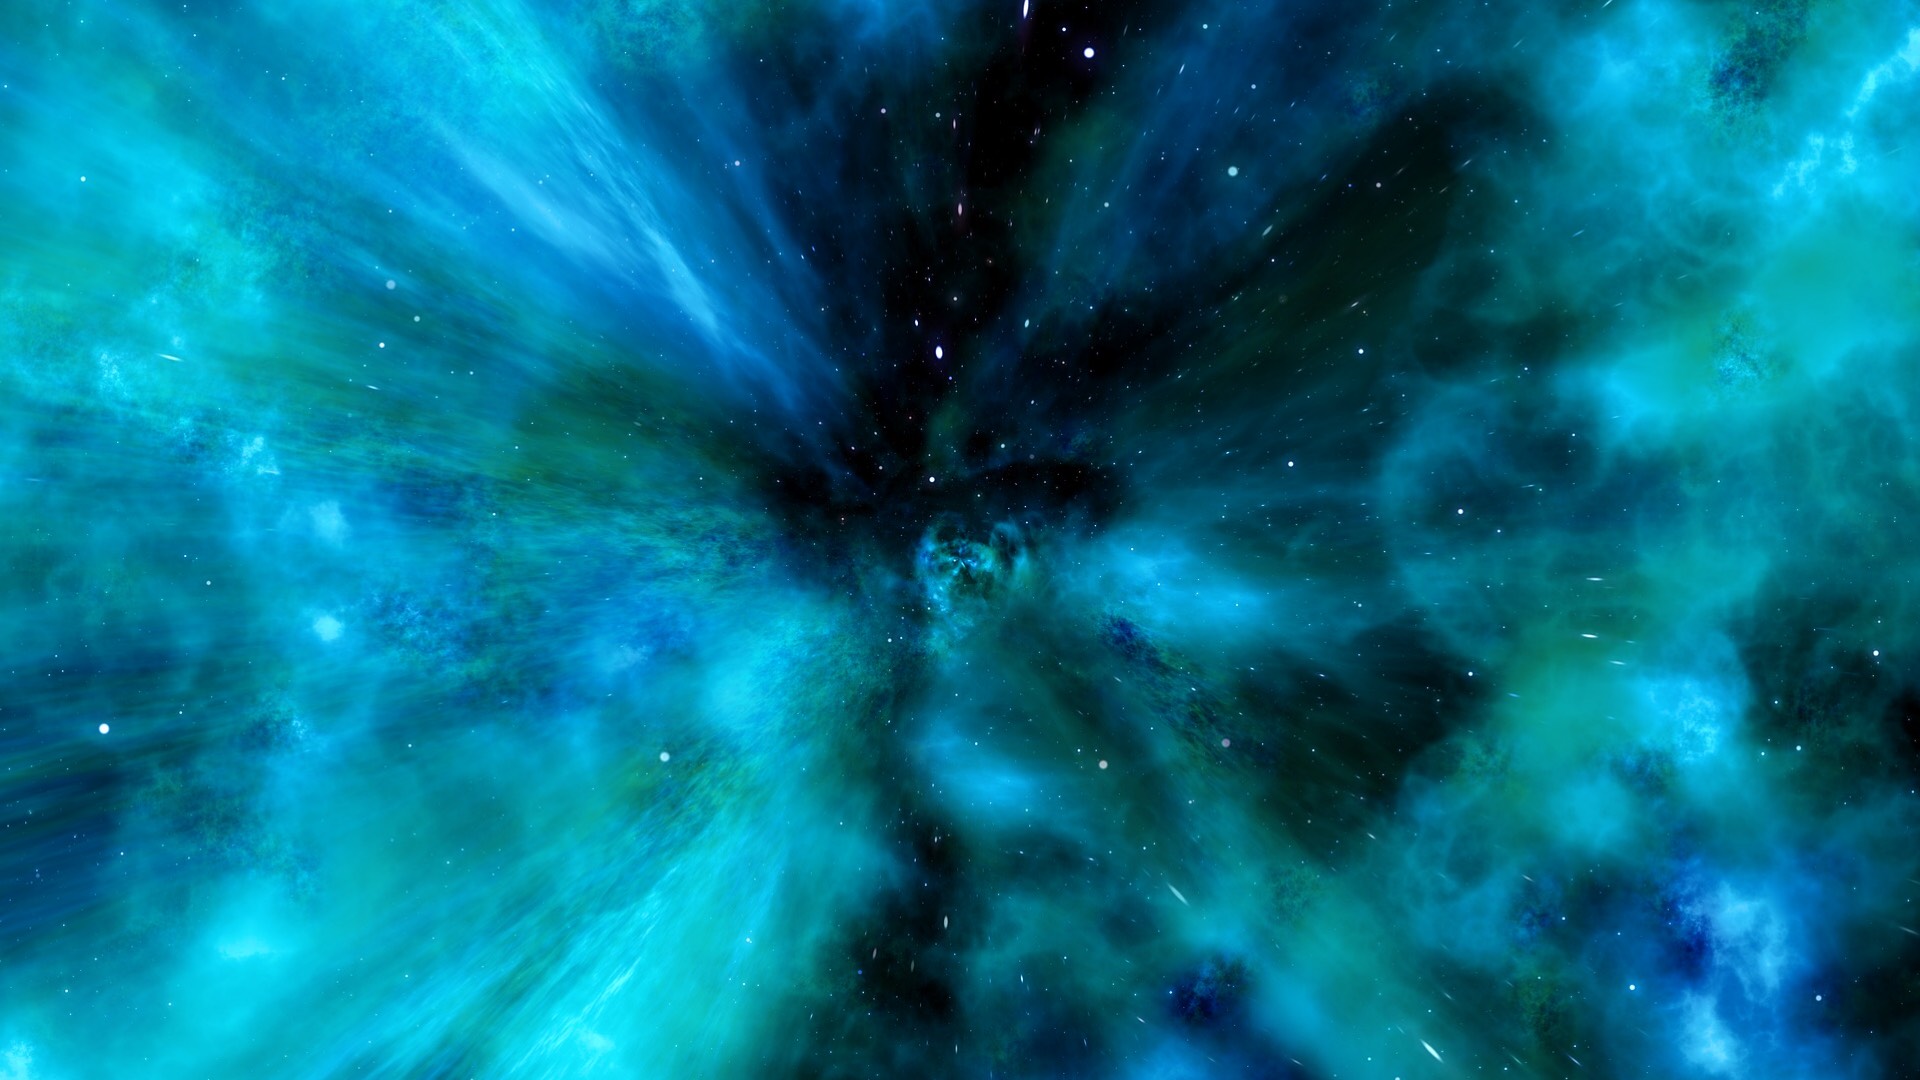 A Blue And Green Space Filled With Stars Zoom Backgrounds Template